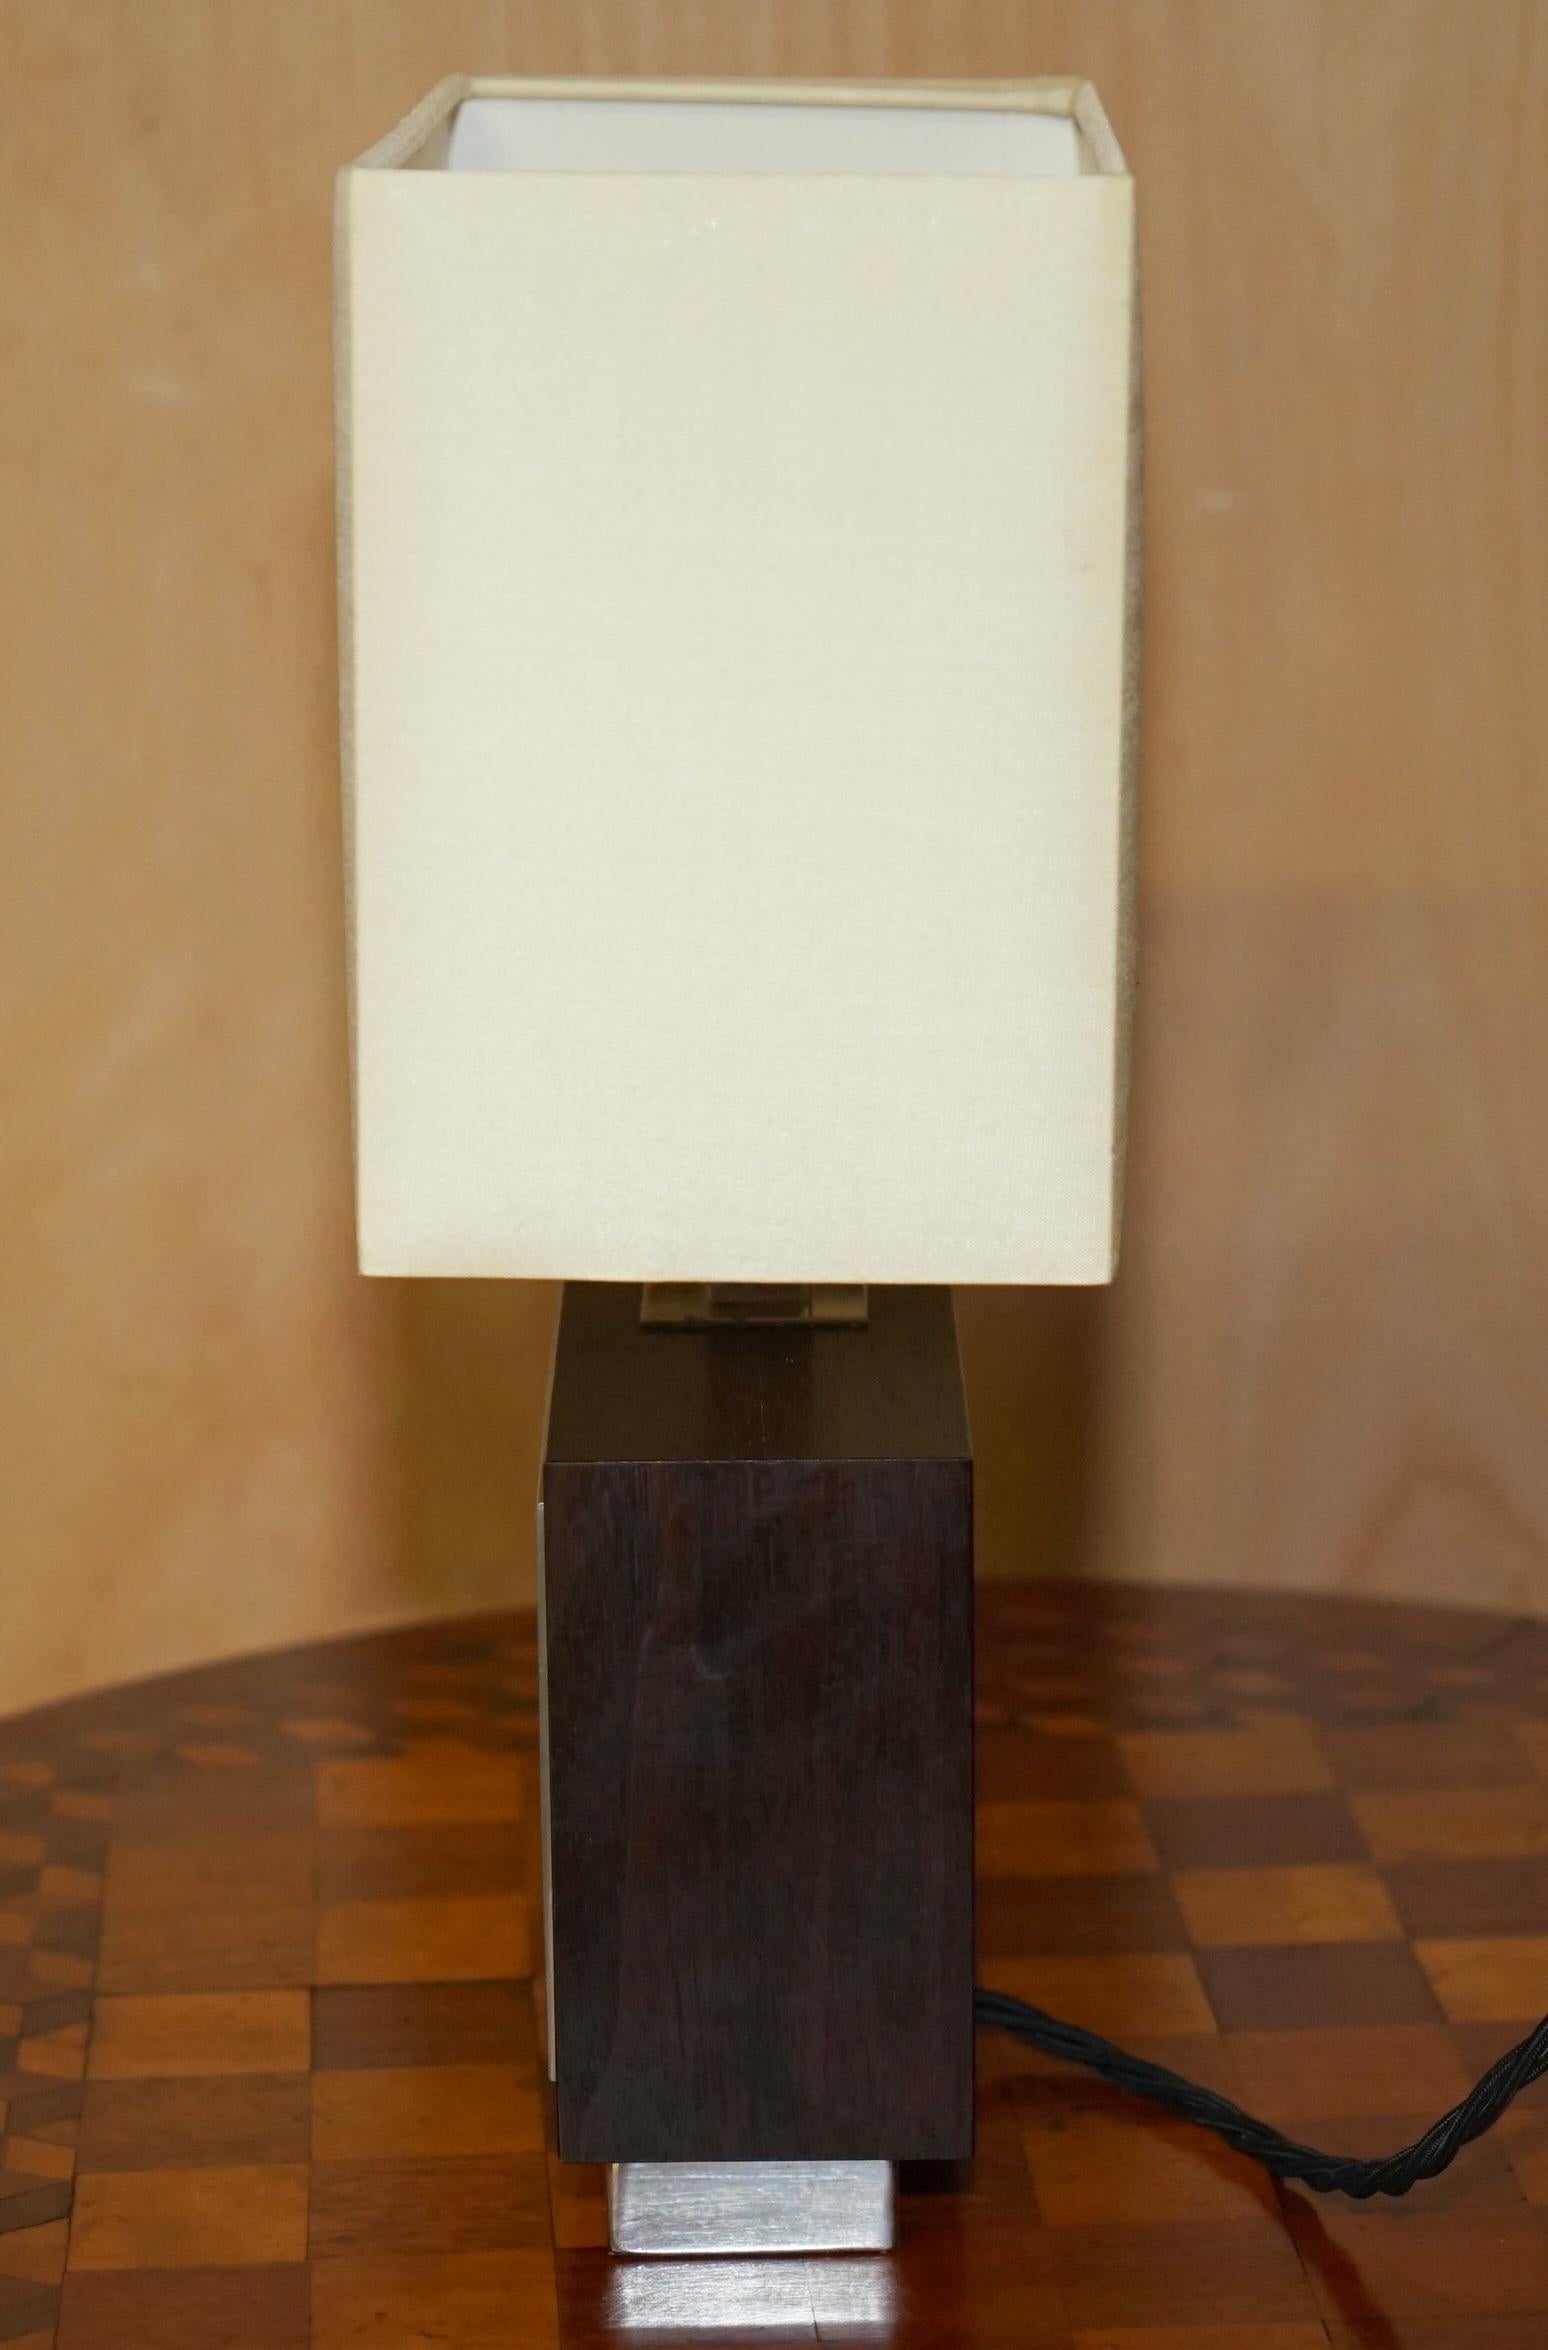 EXQUISITE PAIR OF DAVID LINLEY CHELSEA TABLE LAMPS WITH DIMMER SWITCHEs For Sale 5